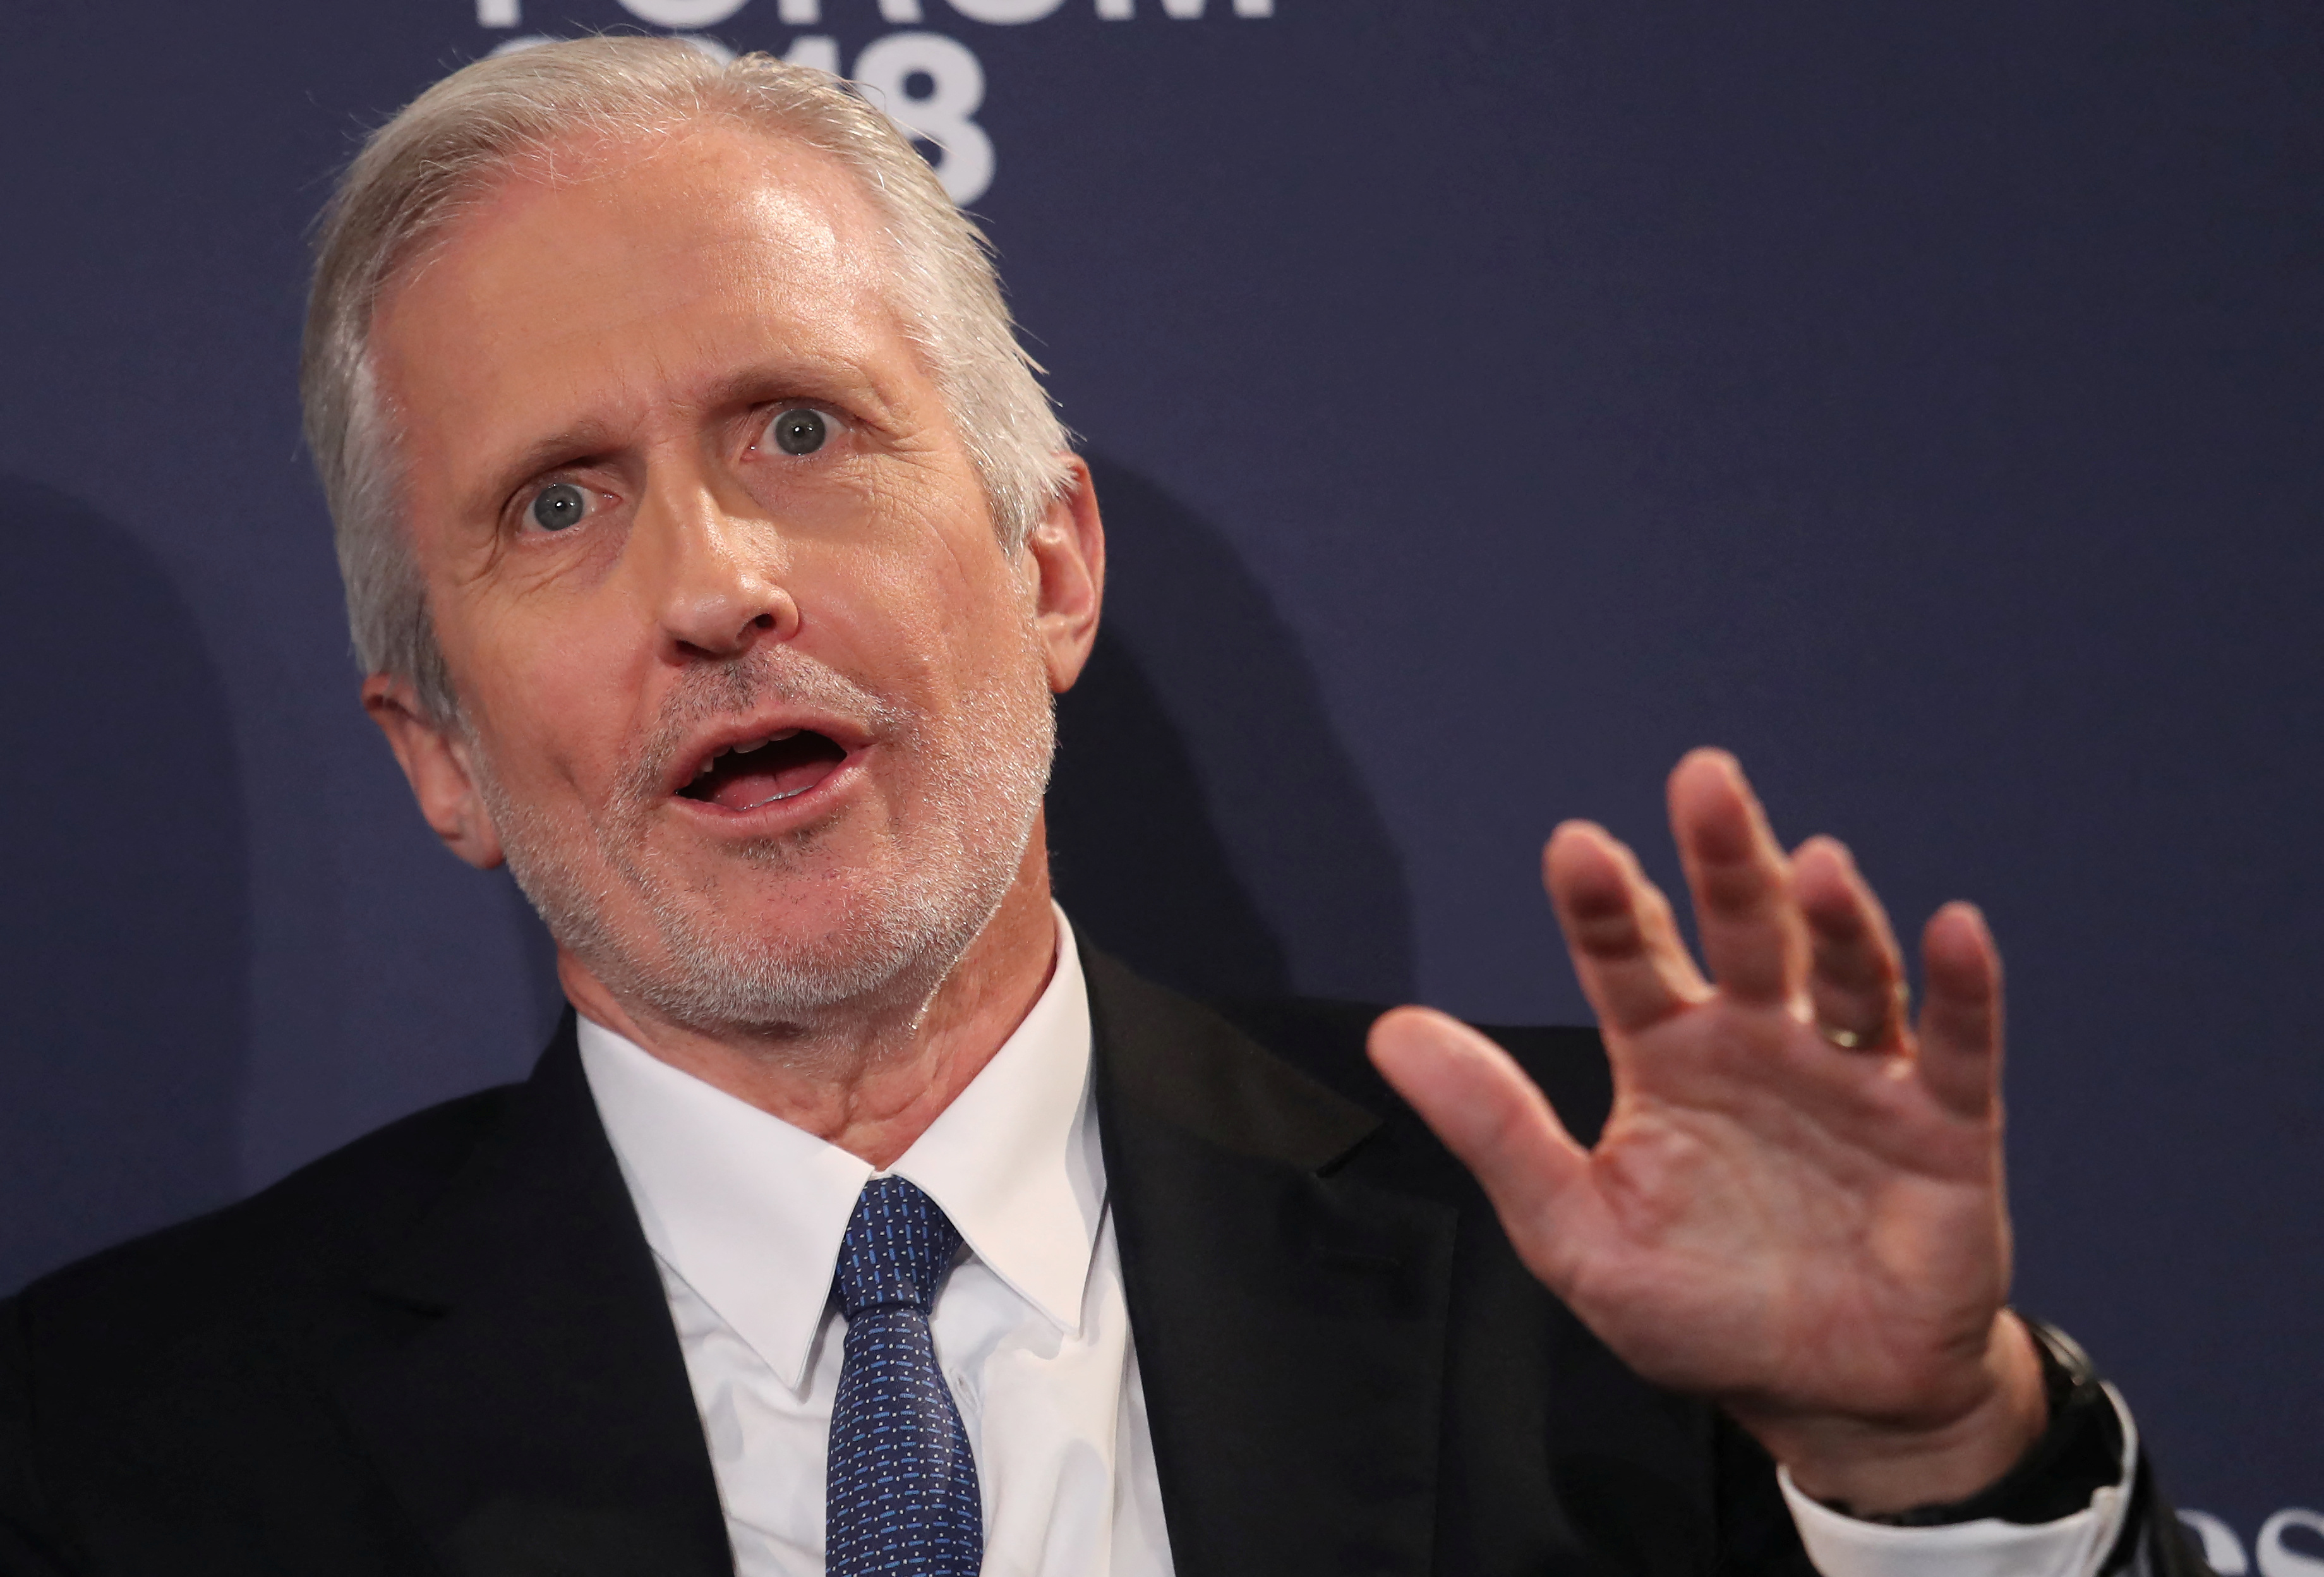 James Coulter co-founder of private equity firm TPG Capital, originally known as the Texas Pacific Group, speaks at the Bloomberg Global Business forum in New York